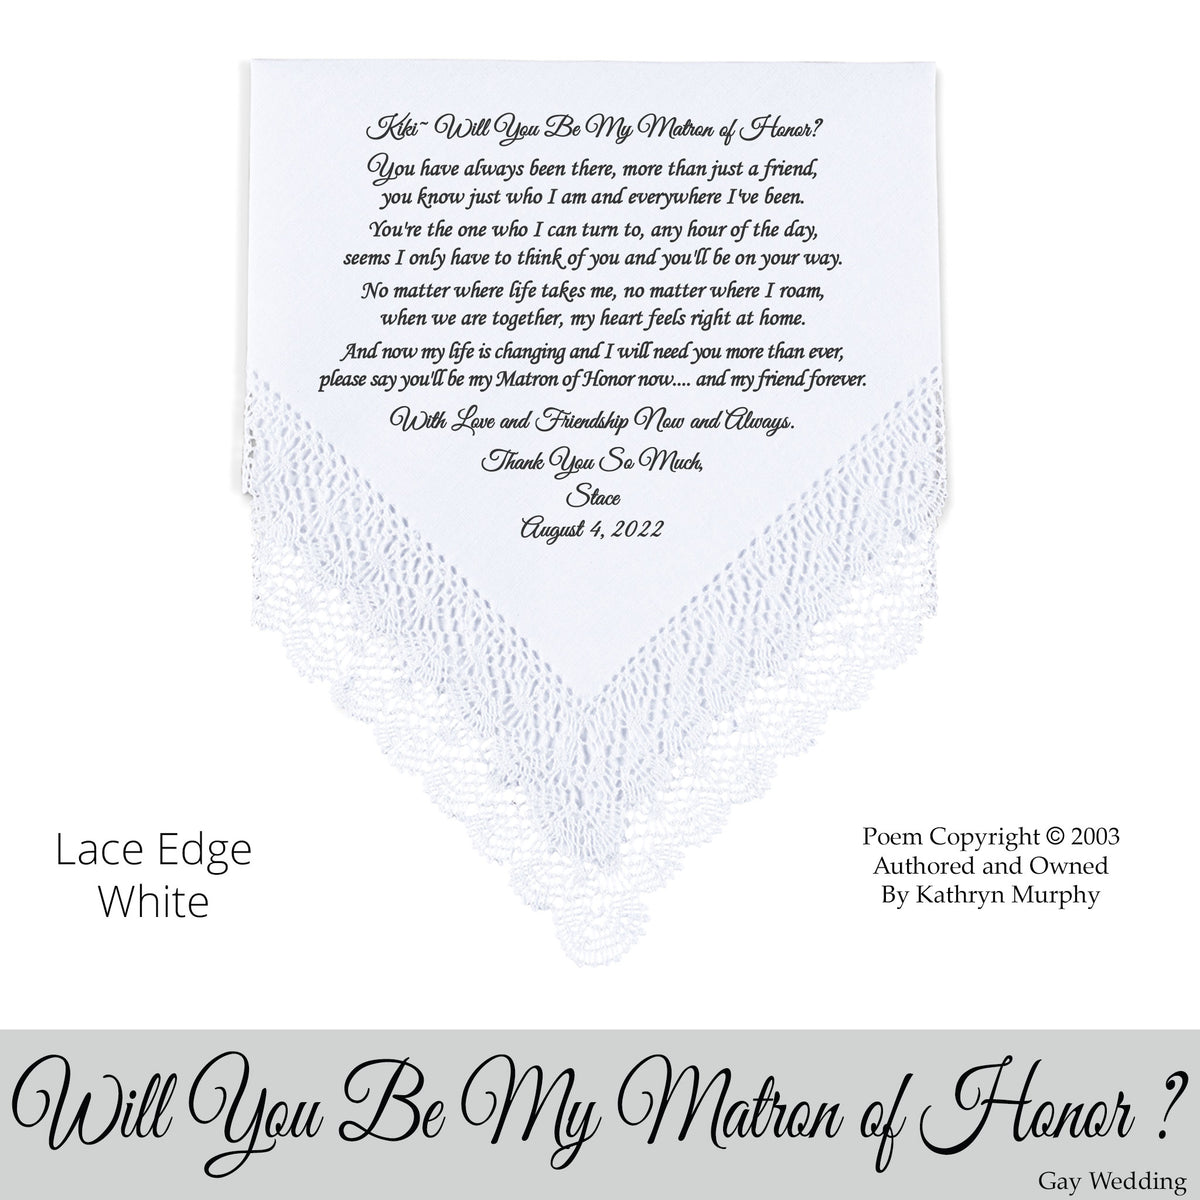 Gay Wedding Gift for the Matron of Honor poem printed wedding hankie